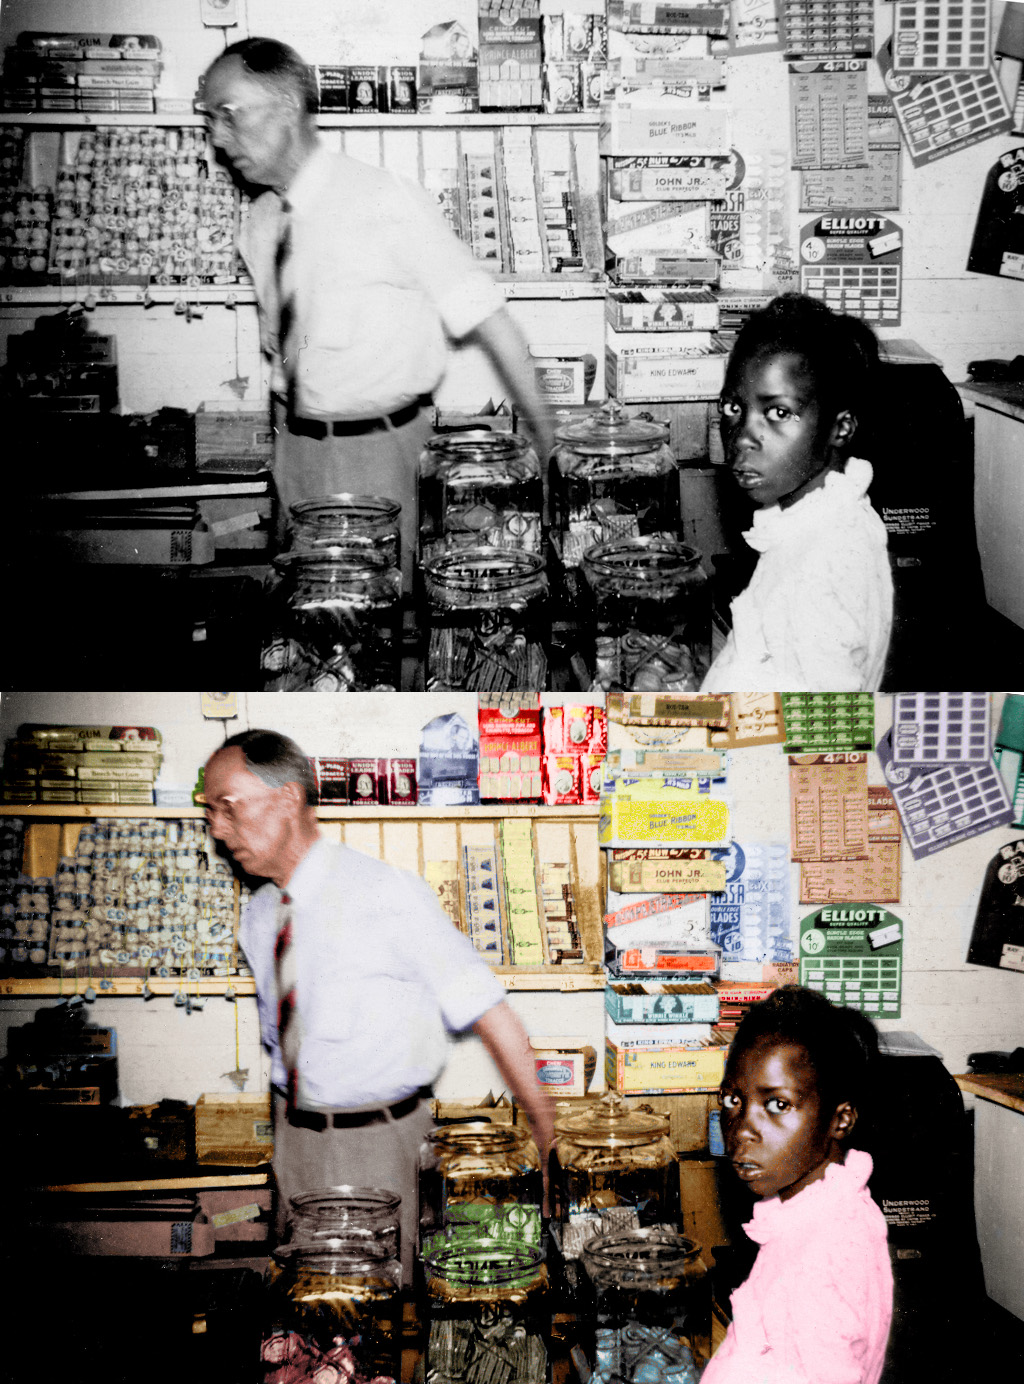 My great grandfather, Haskell "Hack" Martin in his general store in Saluda, South Carolina in the 1930's. View full size.